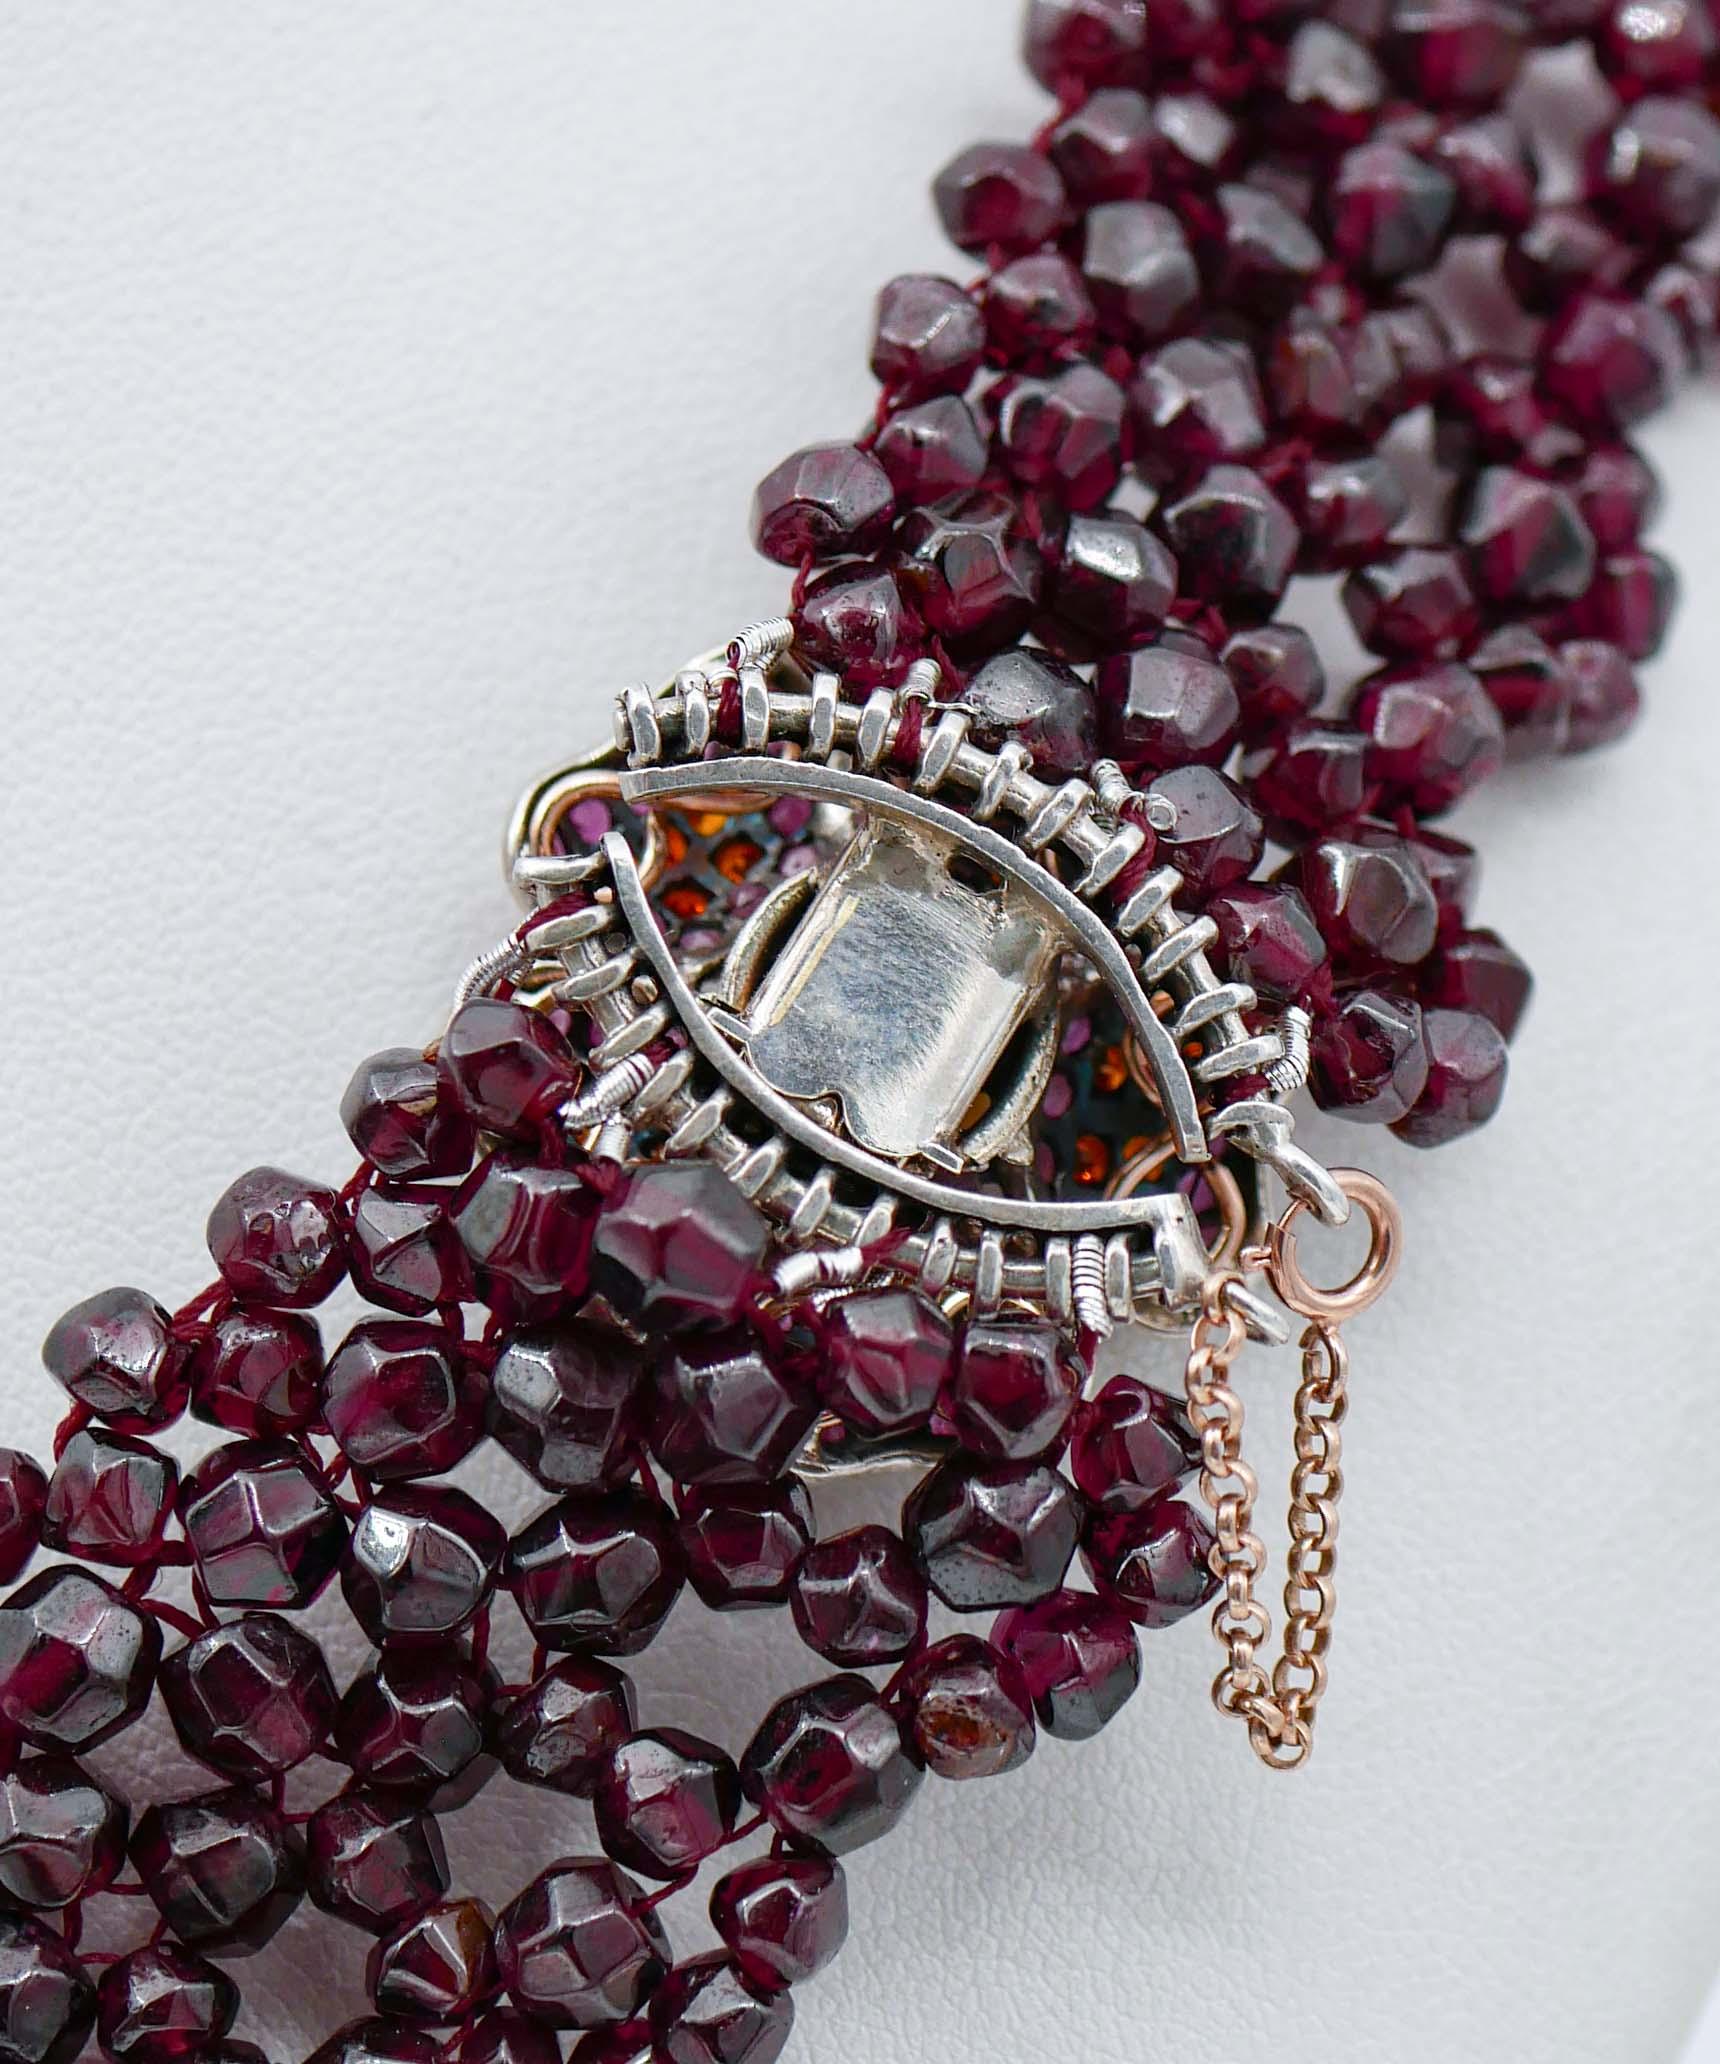 Mixed Cut Rubies, Garnets, Stones, Pearl, Rose Gold and Silver Multi-Strands Necklace For Sale